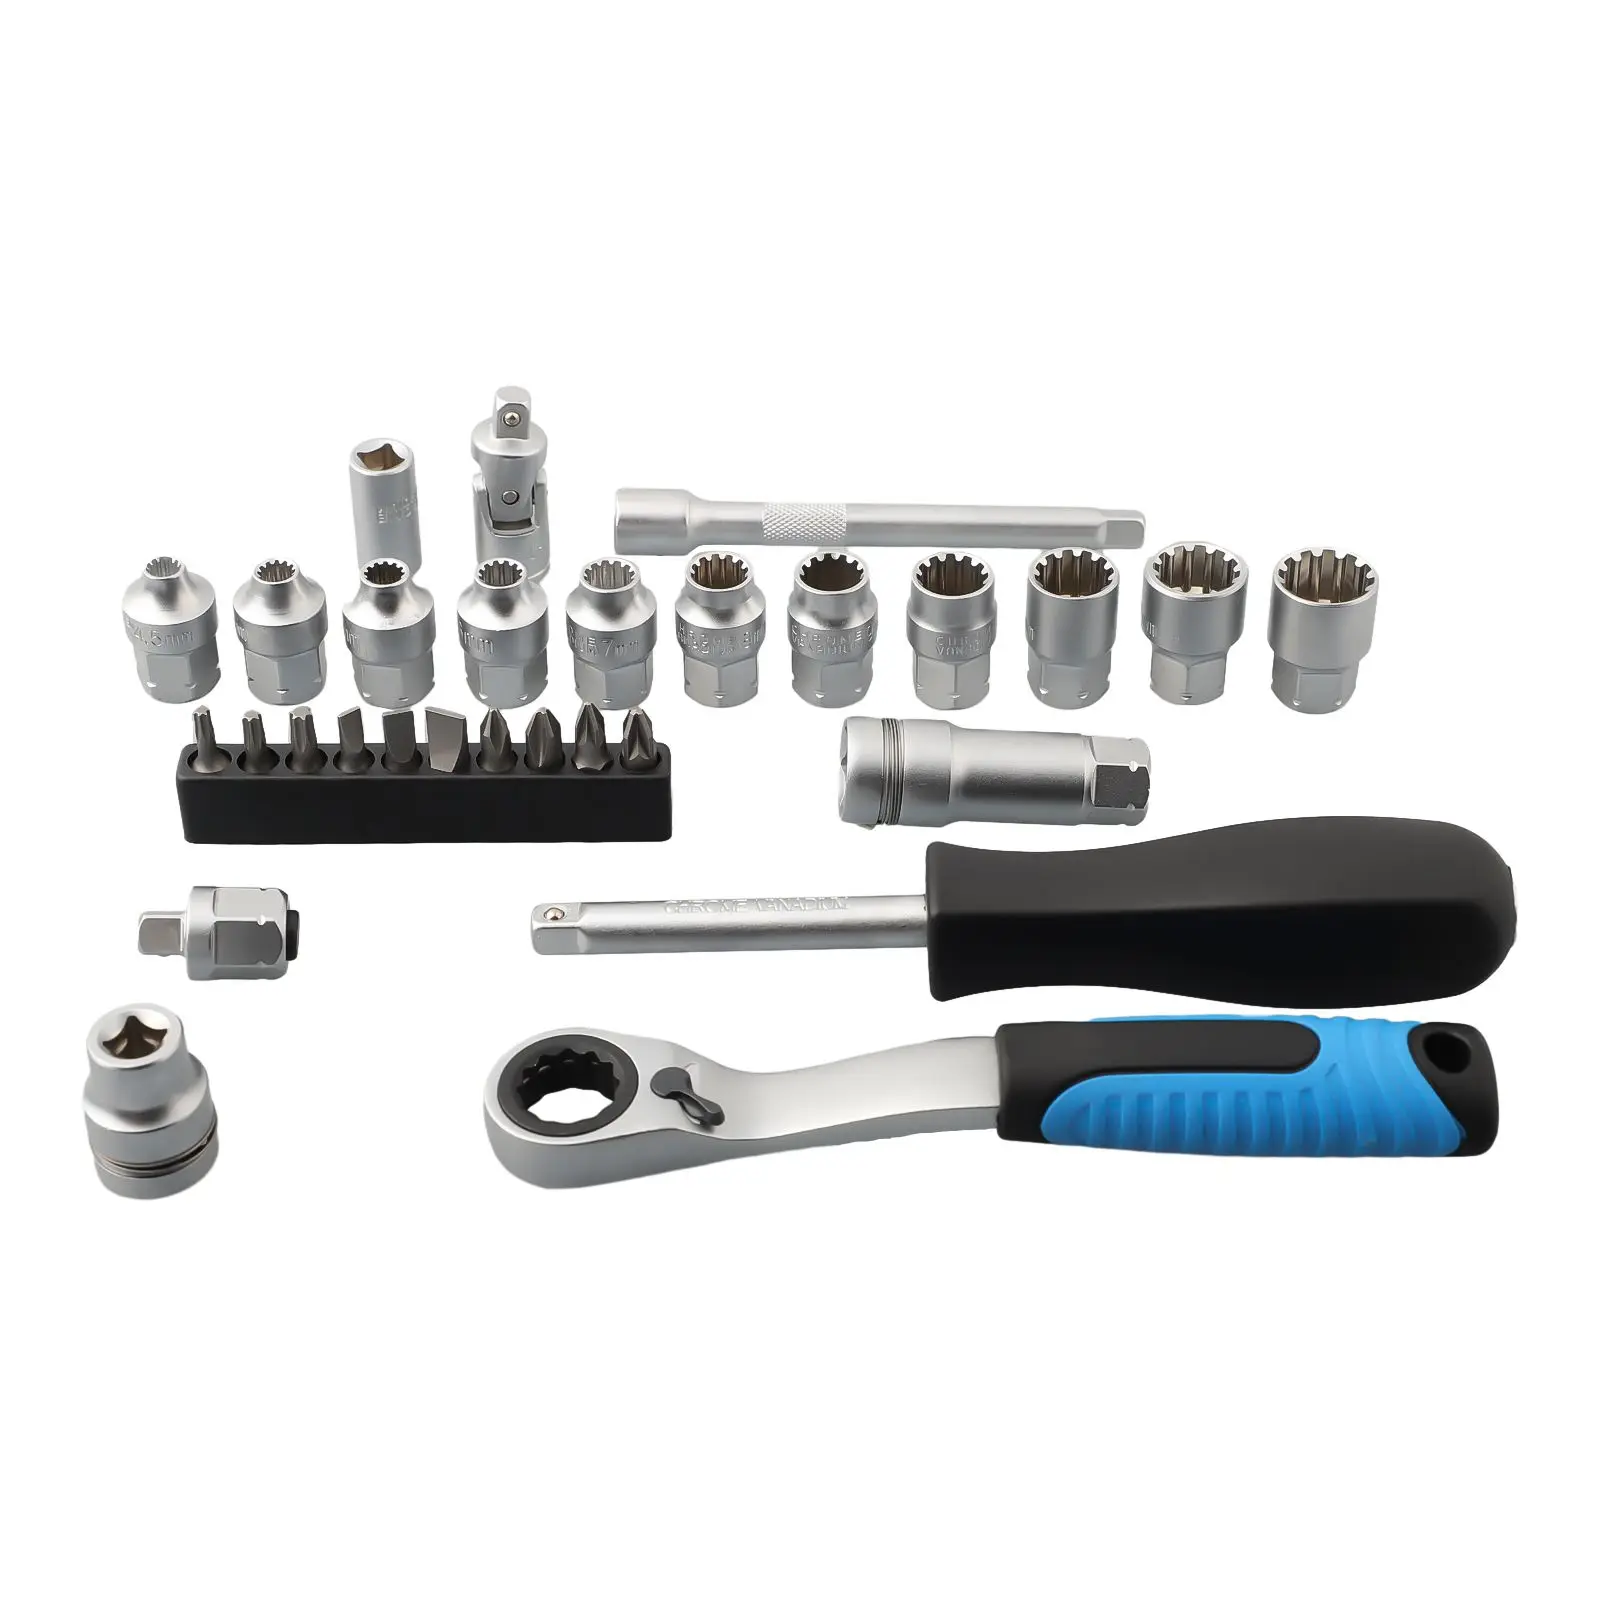 

Core Ratchet Socket Wrench Kit Chrome-vanadium Steel Torque Wrench Kit Withstand High Torque Automotive Repairs